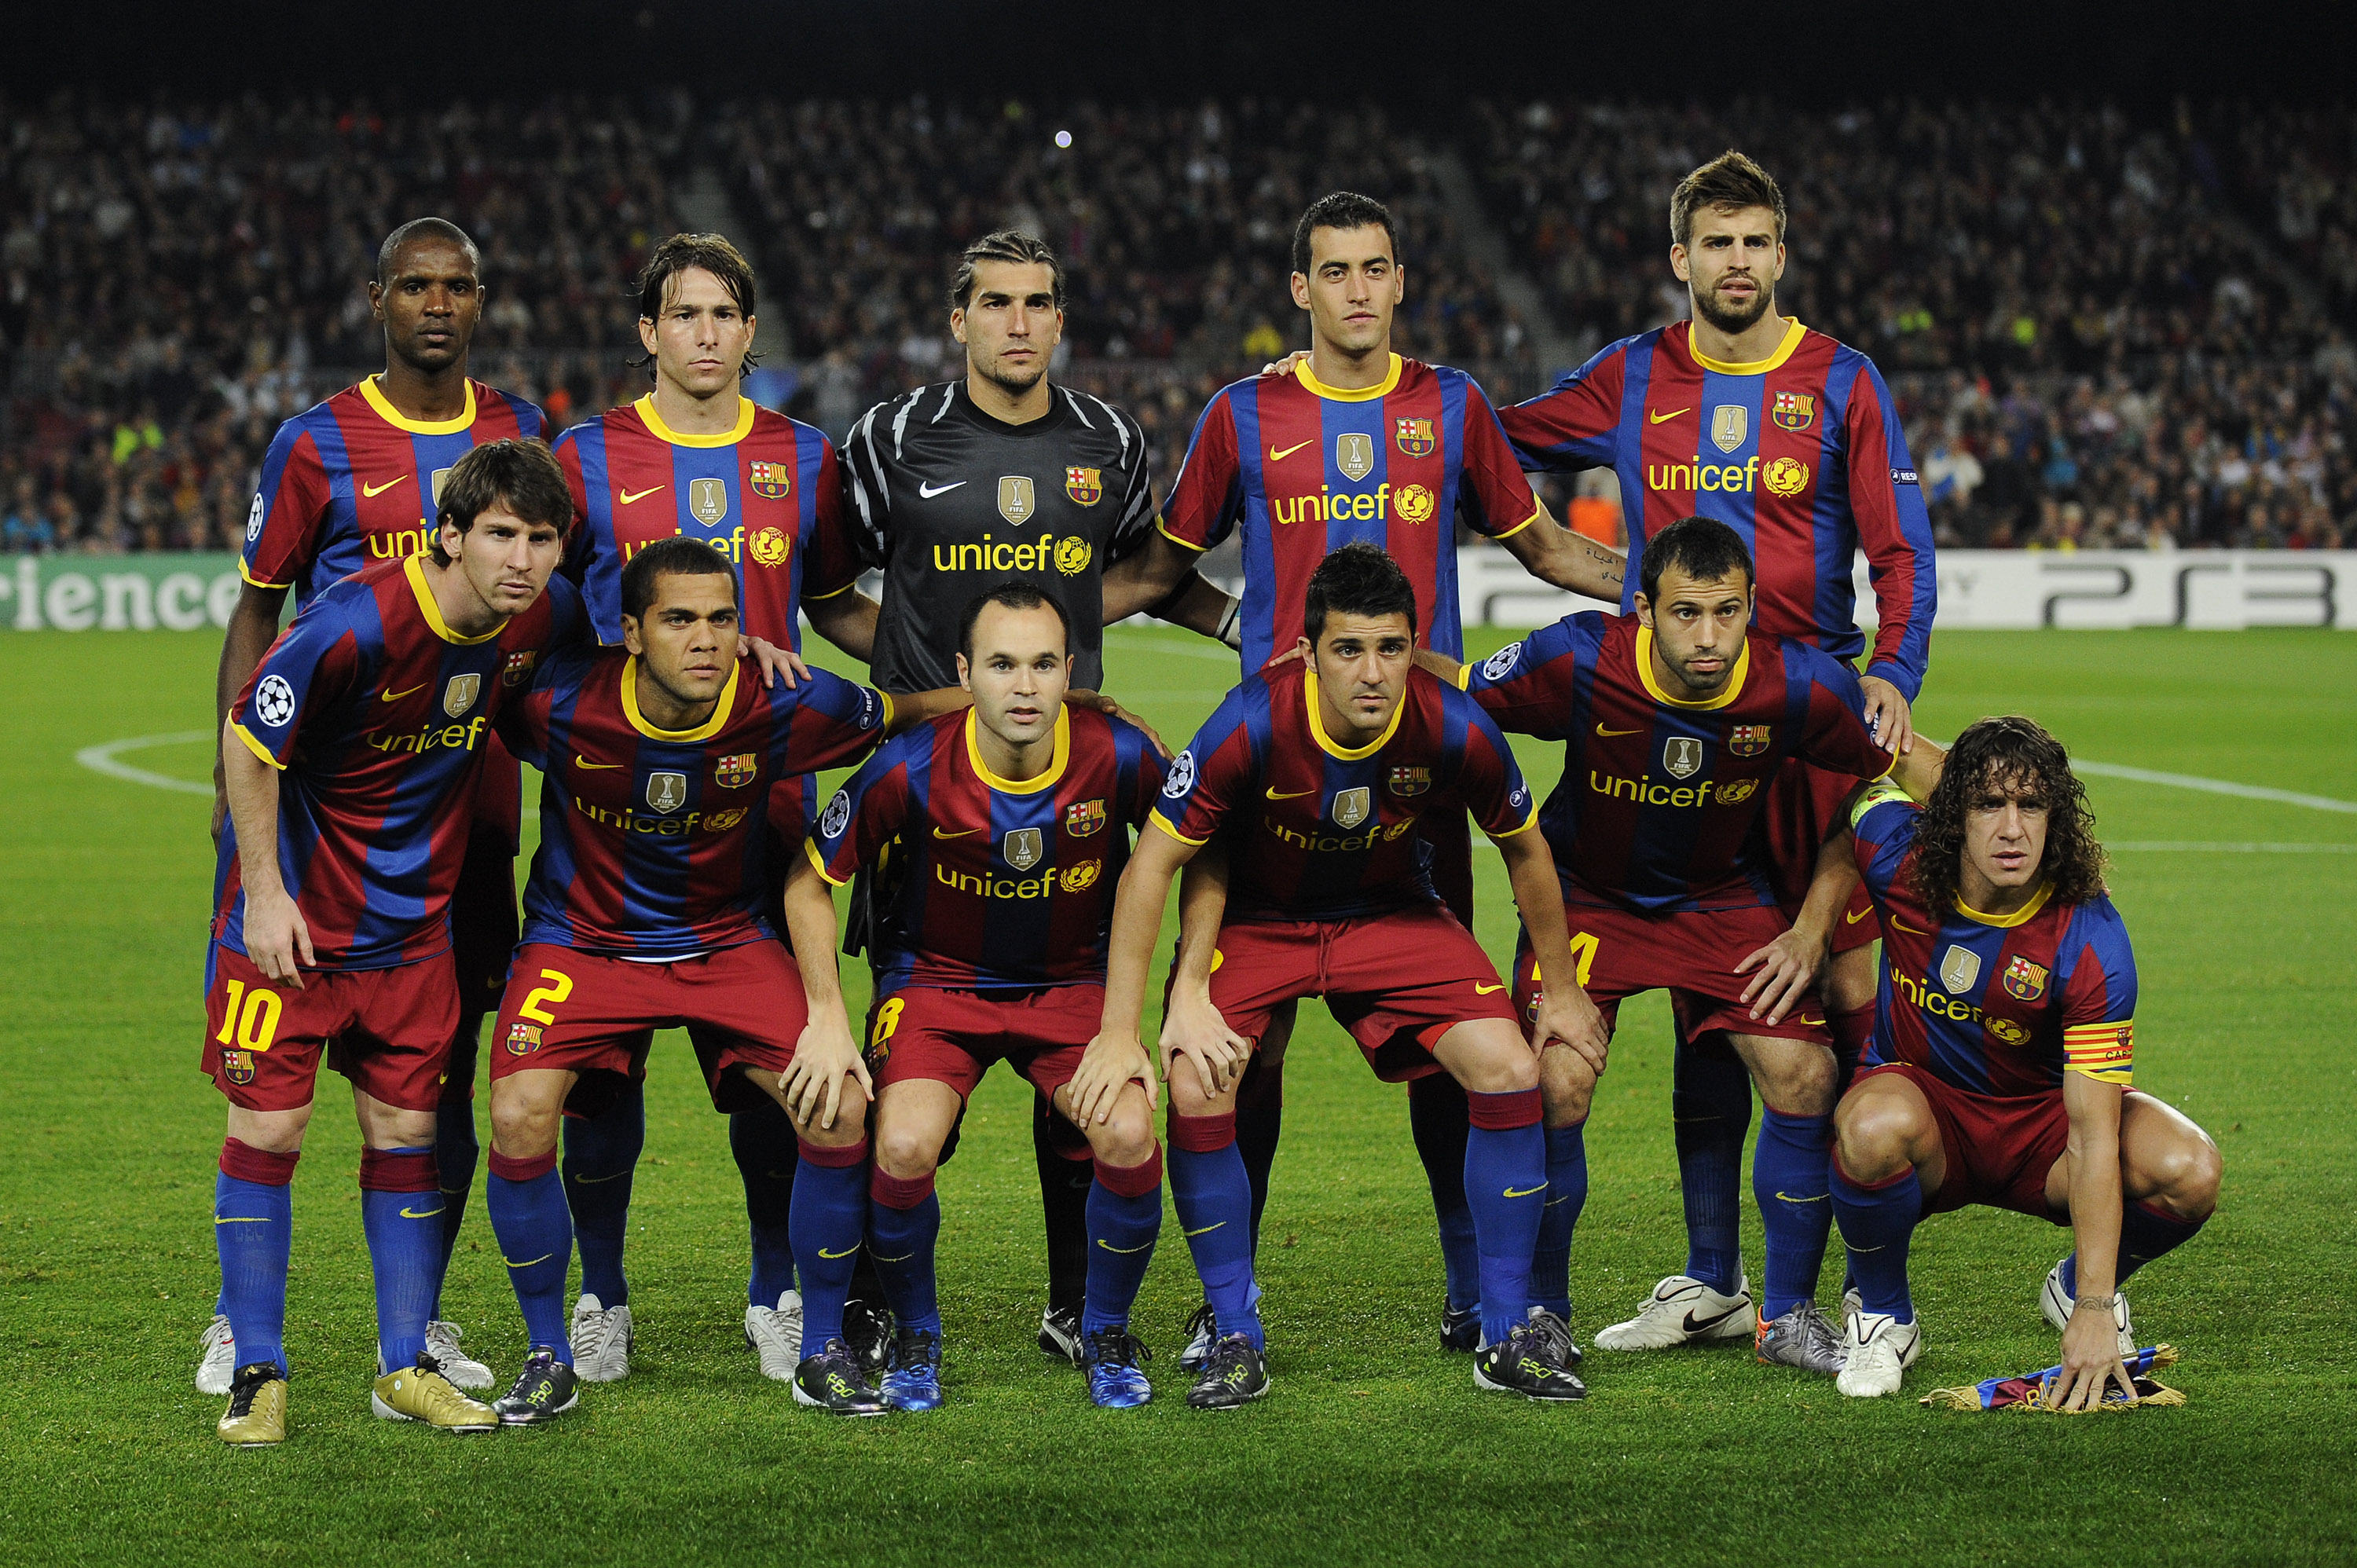 BARCELONA, SPAIN - OCTOBER 20:  Barcelona players (From L-R) Eric Abidal, Lionell Messi, Maxwell, Daniel Alves, Jose Pinto, Andres Iniesta, David Villa, Sergio Busquets, Javier Mascherano, Gerard Pique, Carles Puyol pose for a team picture during the UEFA